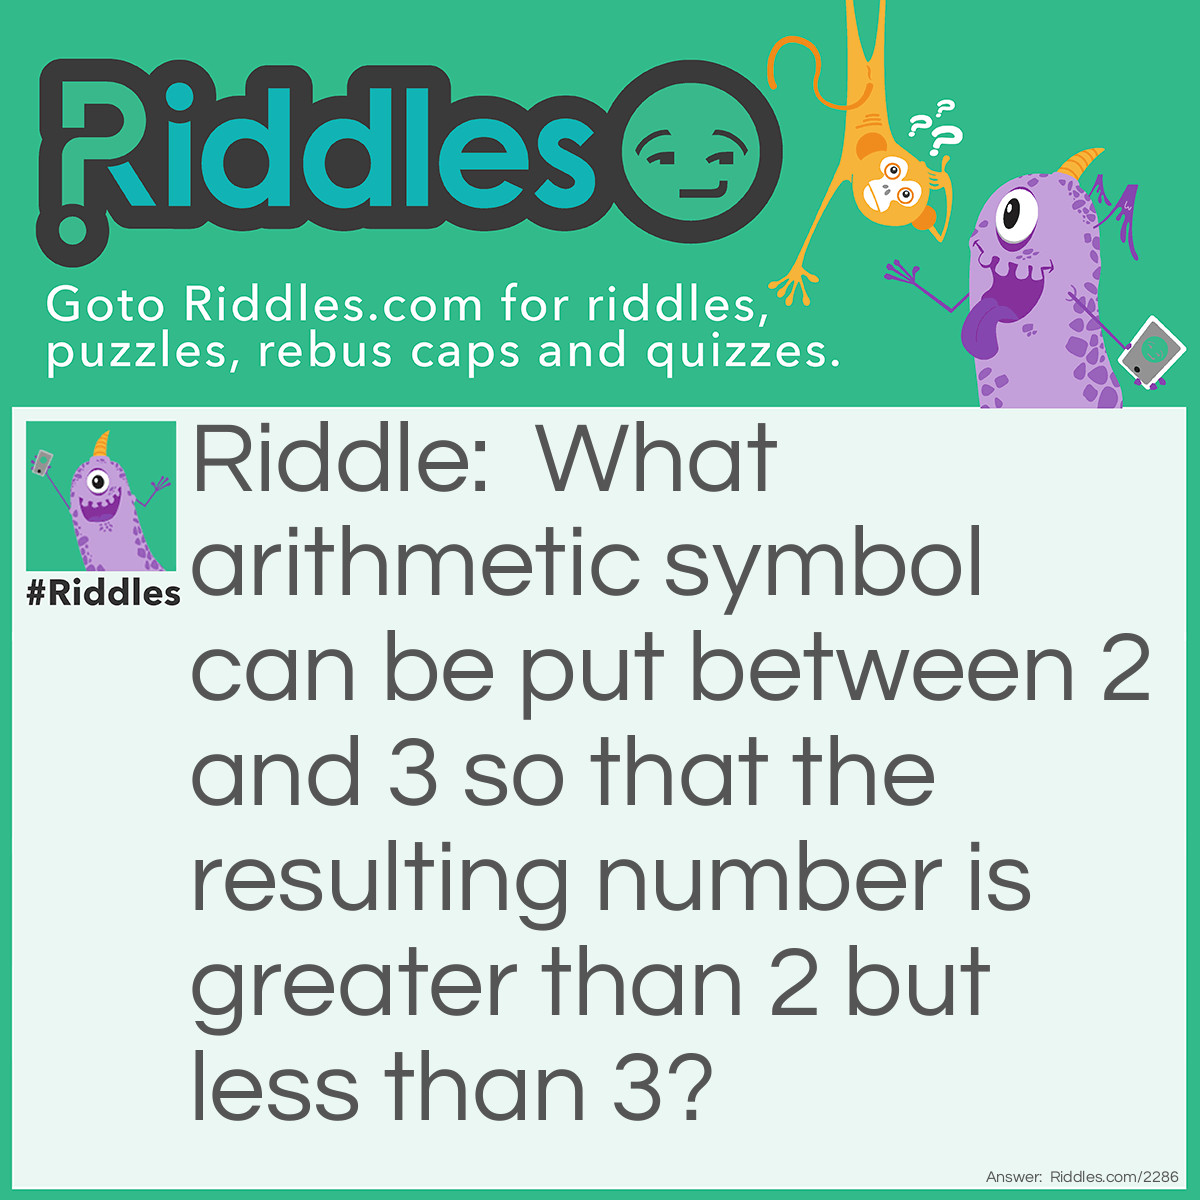 Riddle: What arithmetic symbol can we place between 2 and 3 to make a number greater than 2 but less than 3? Answer: A decimal point.